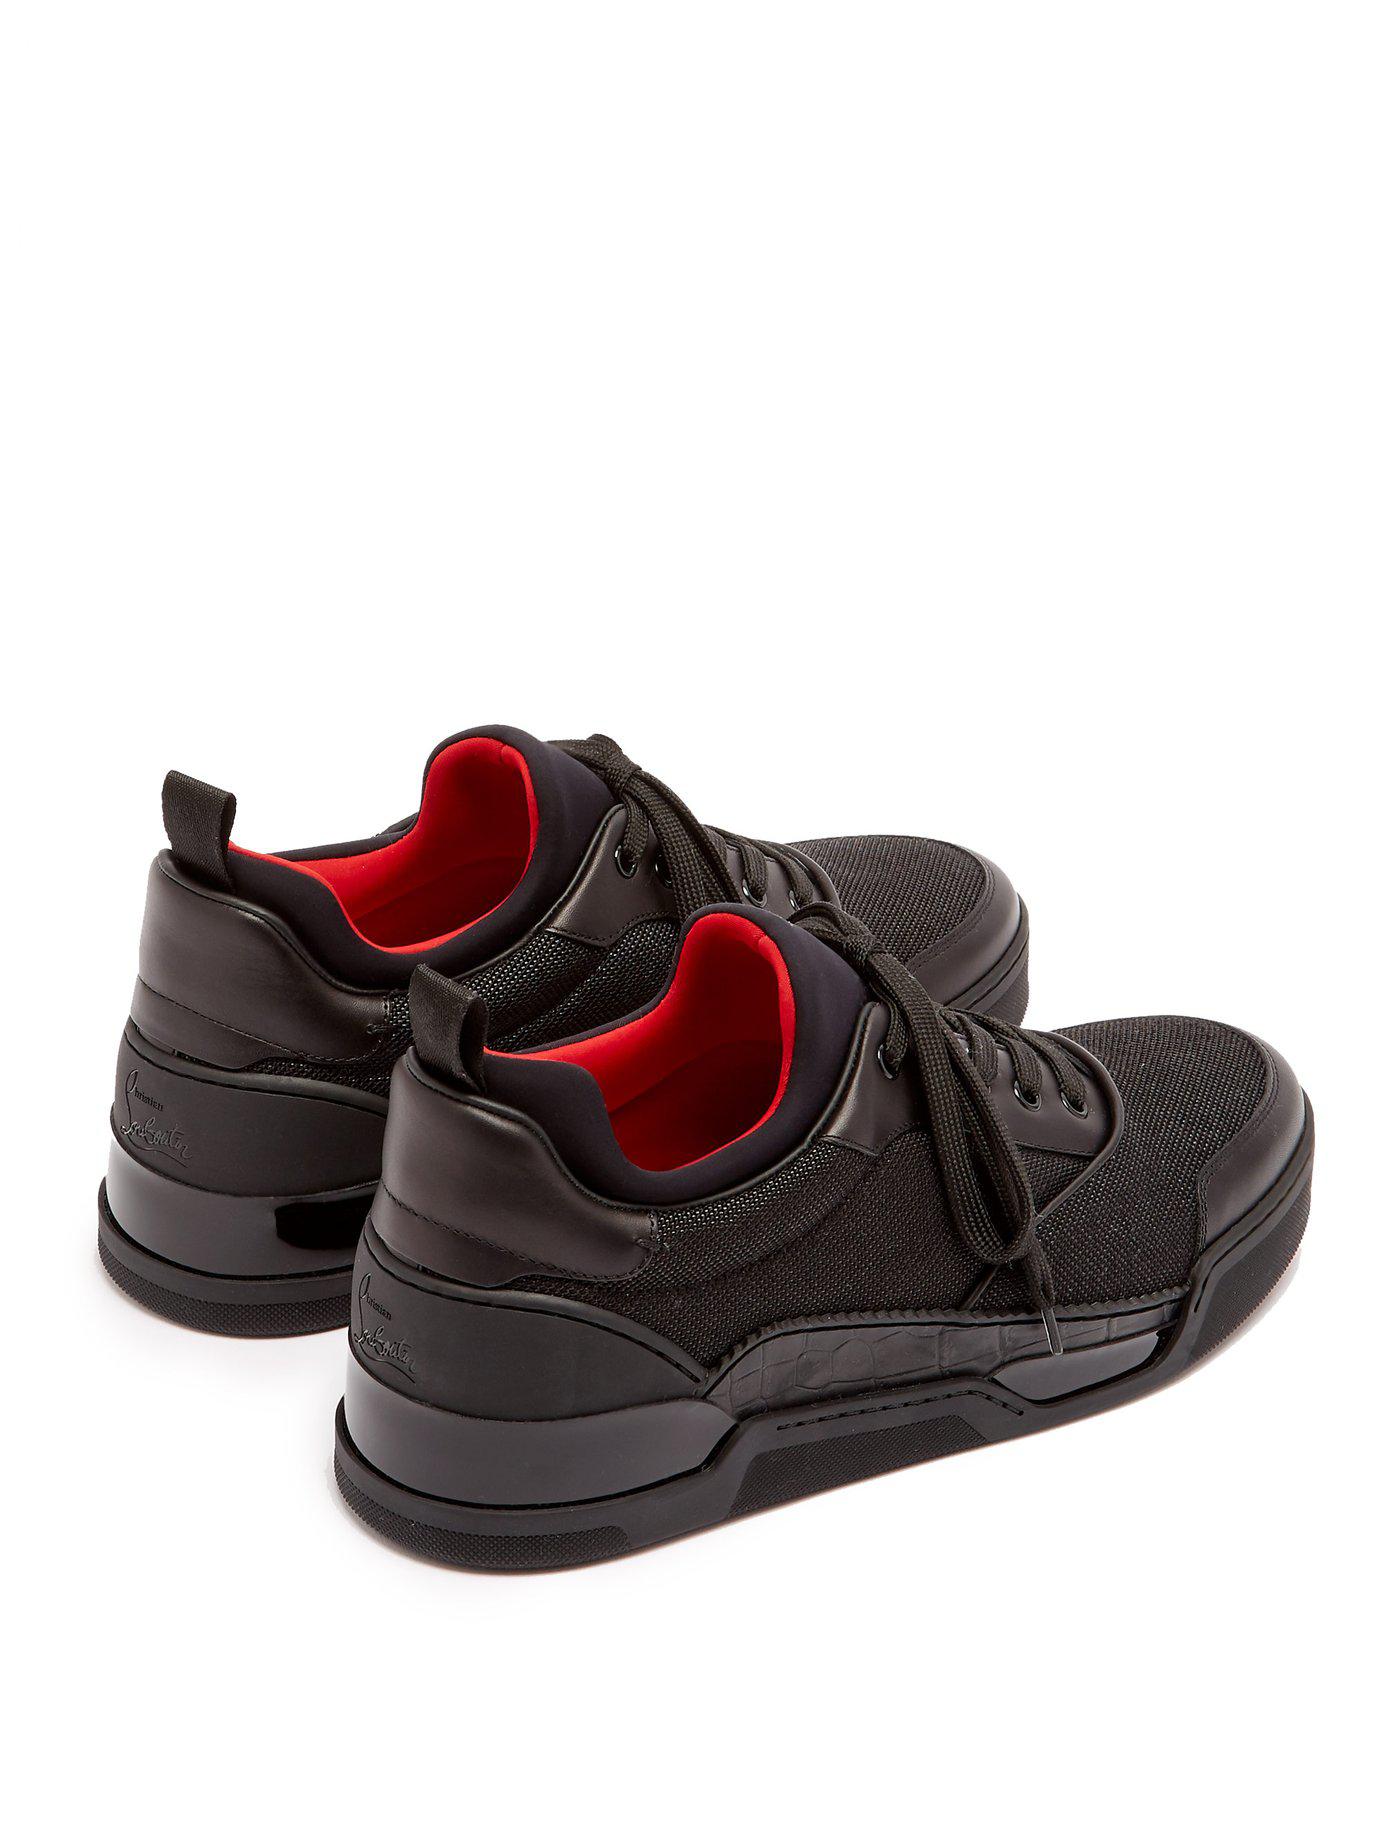 Christian Louboutin Aurelien Low-top Leather And Neoprene Trainers